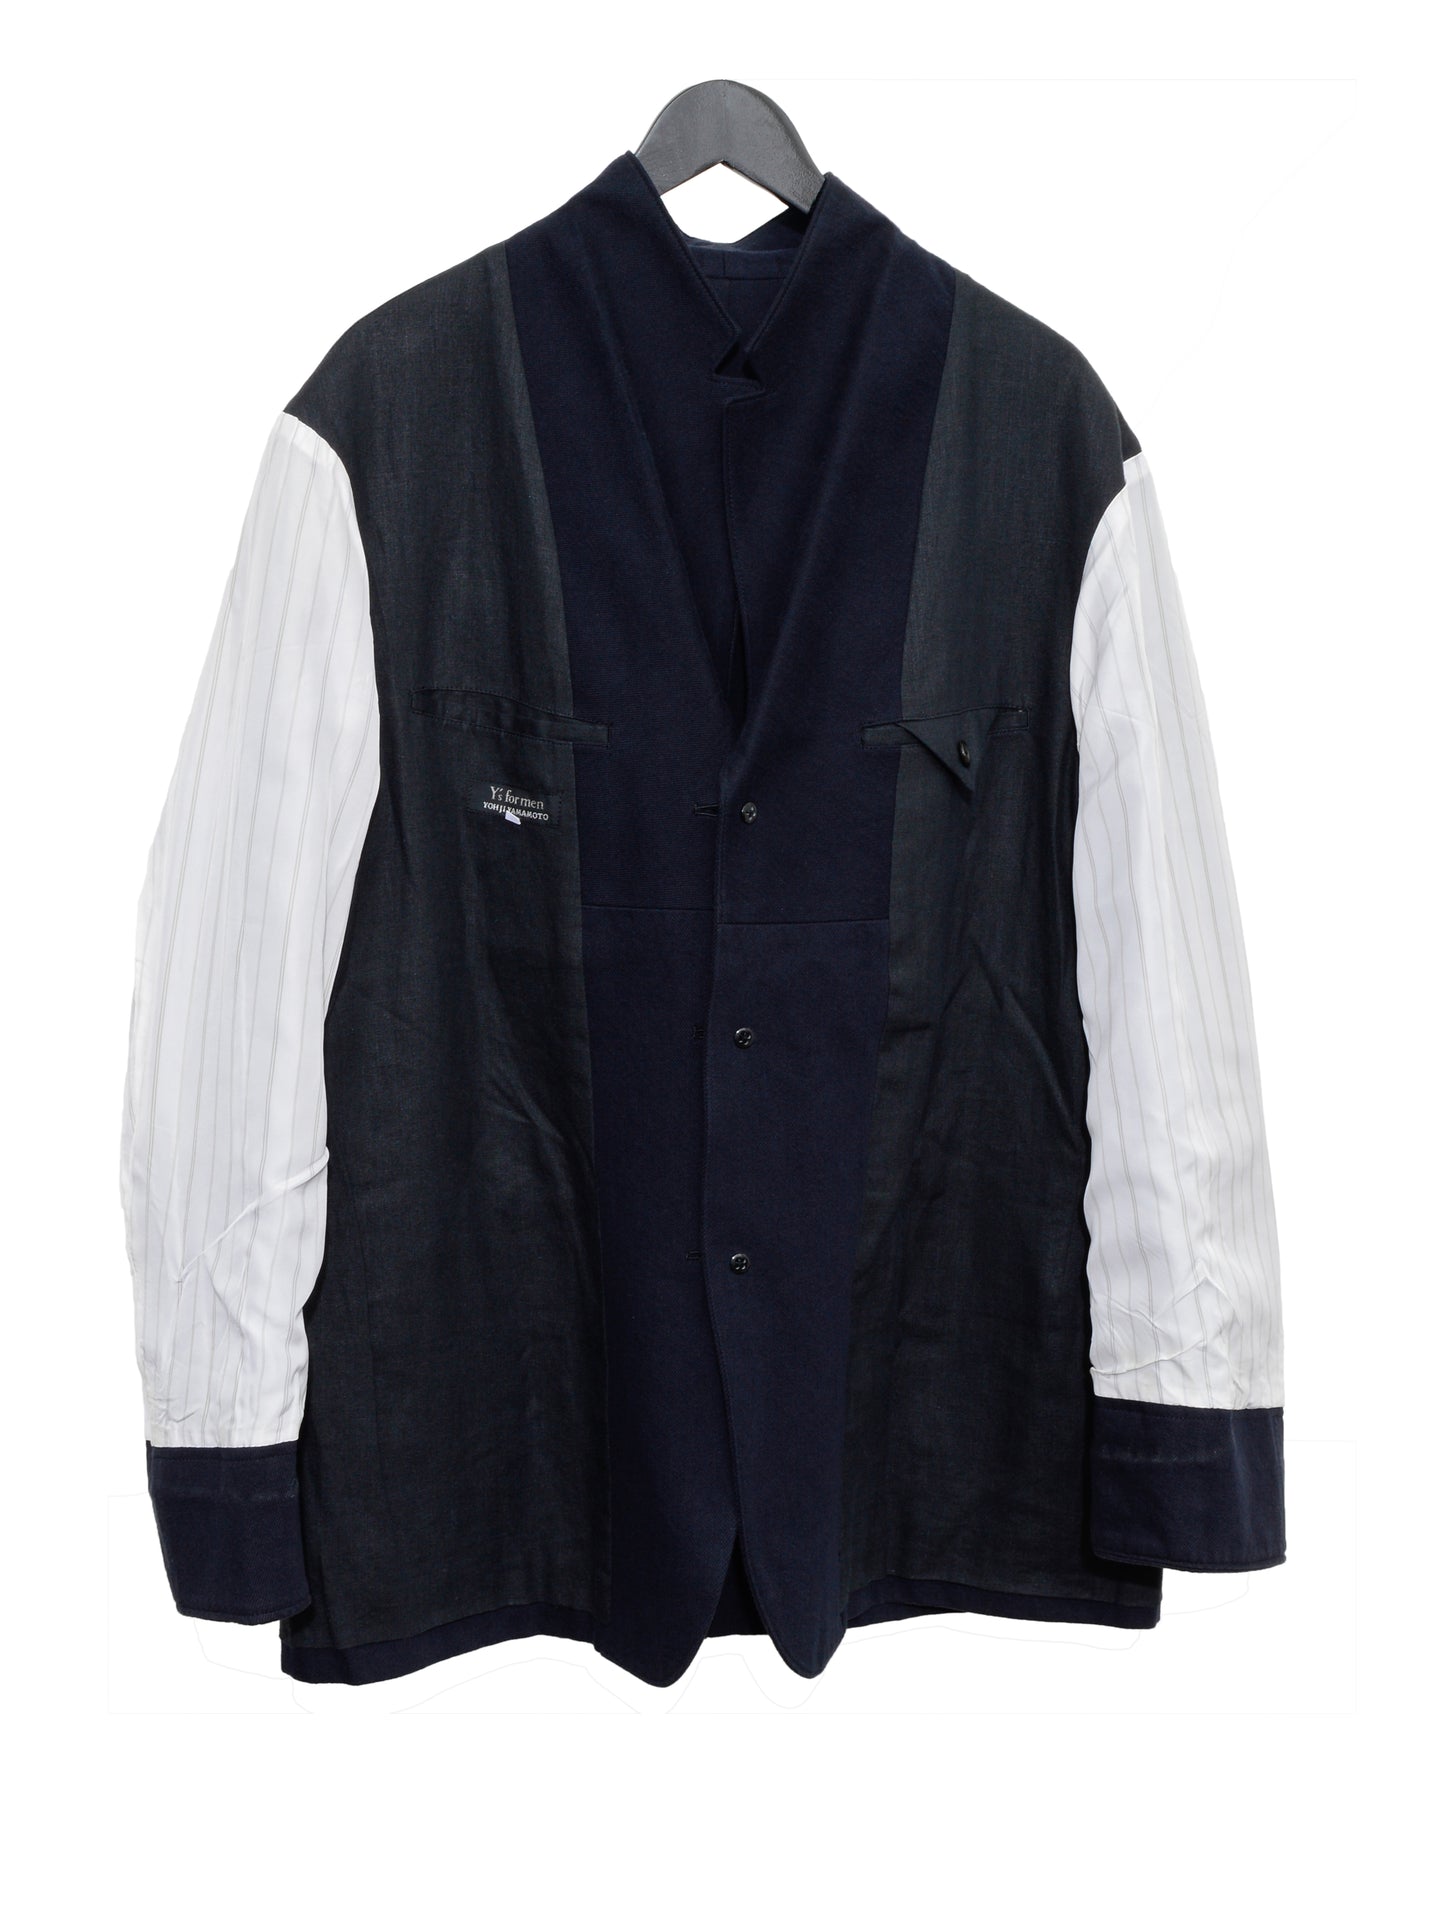 tailored jacket navy dyed ∙ cotton ∙ small